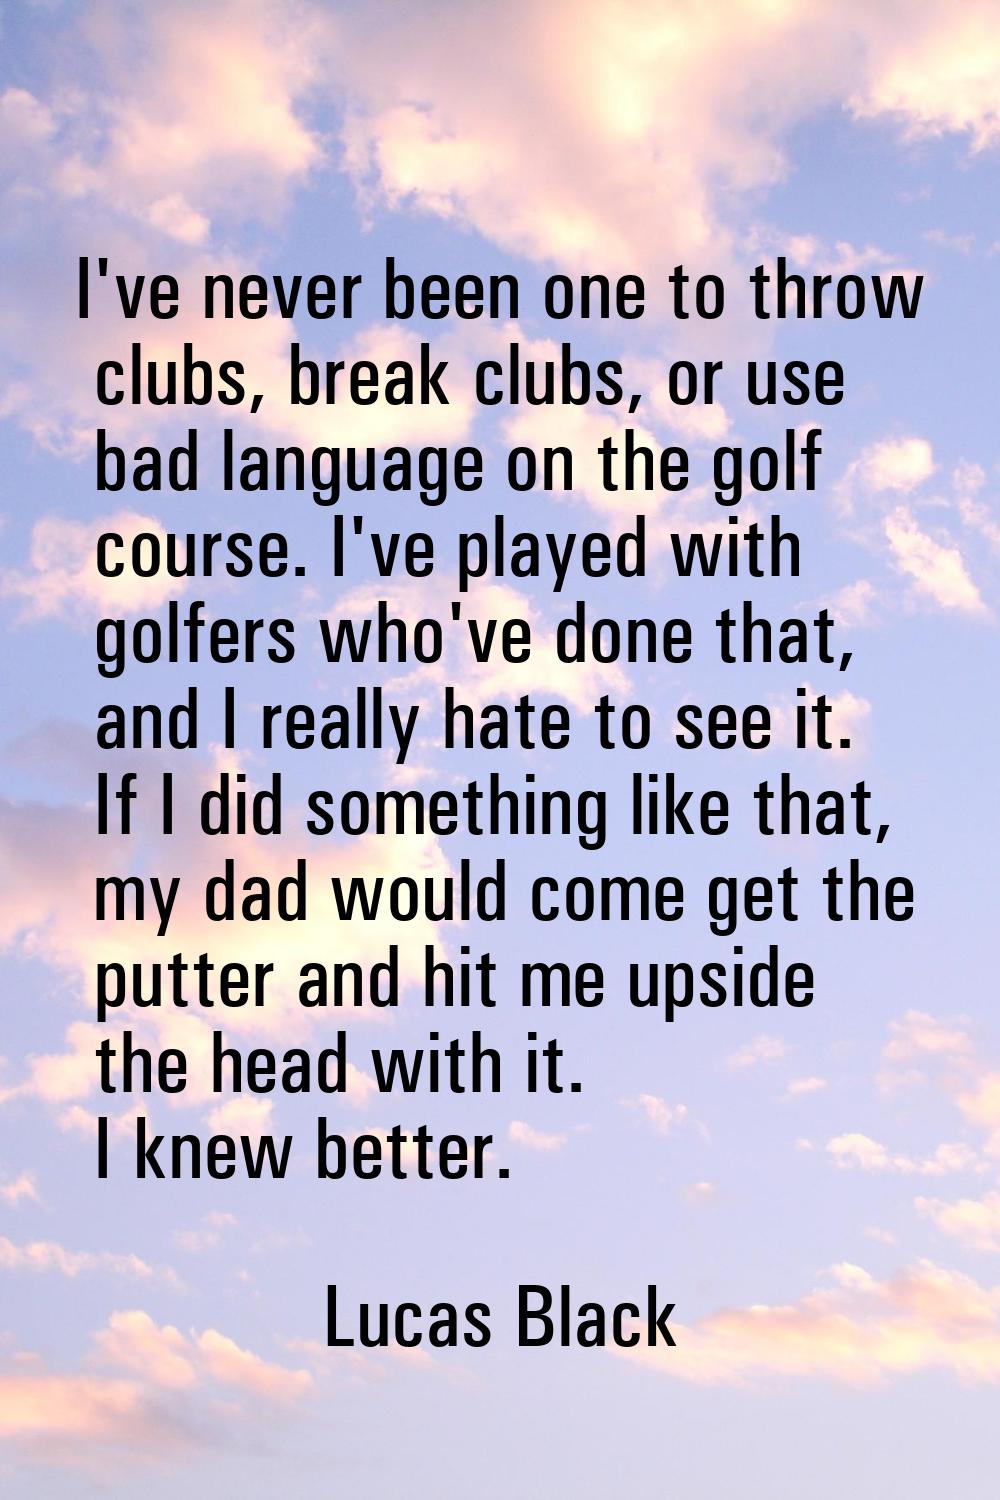 I've never been one to throw clubs, break clubs, or use bad language on the golf course. I've playe